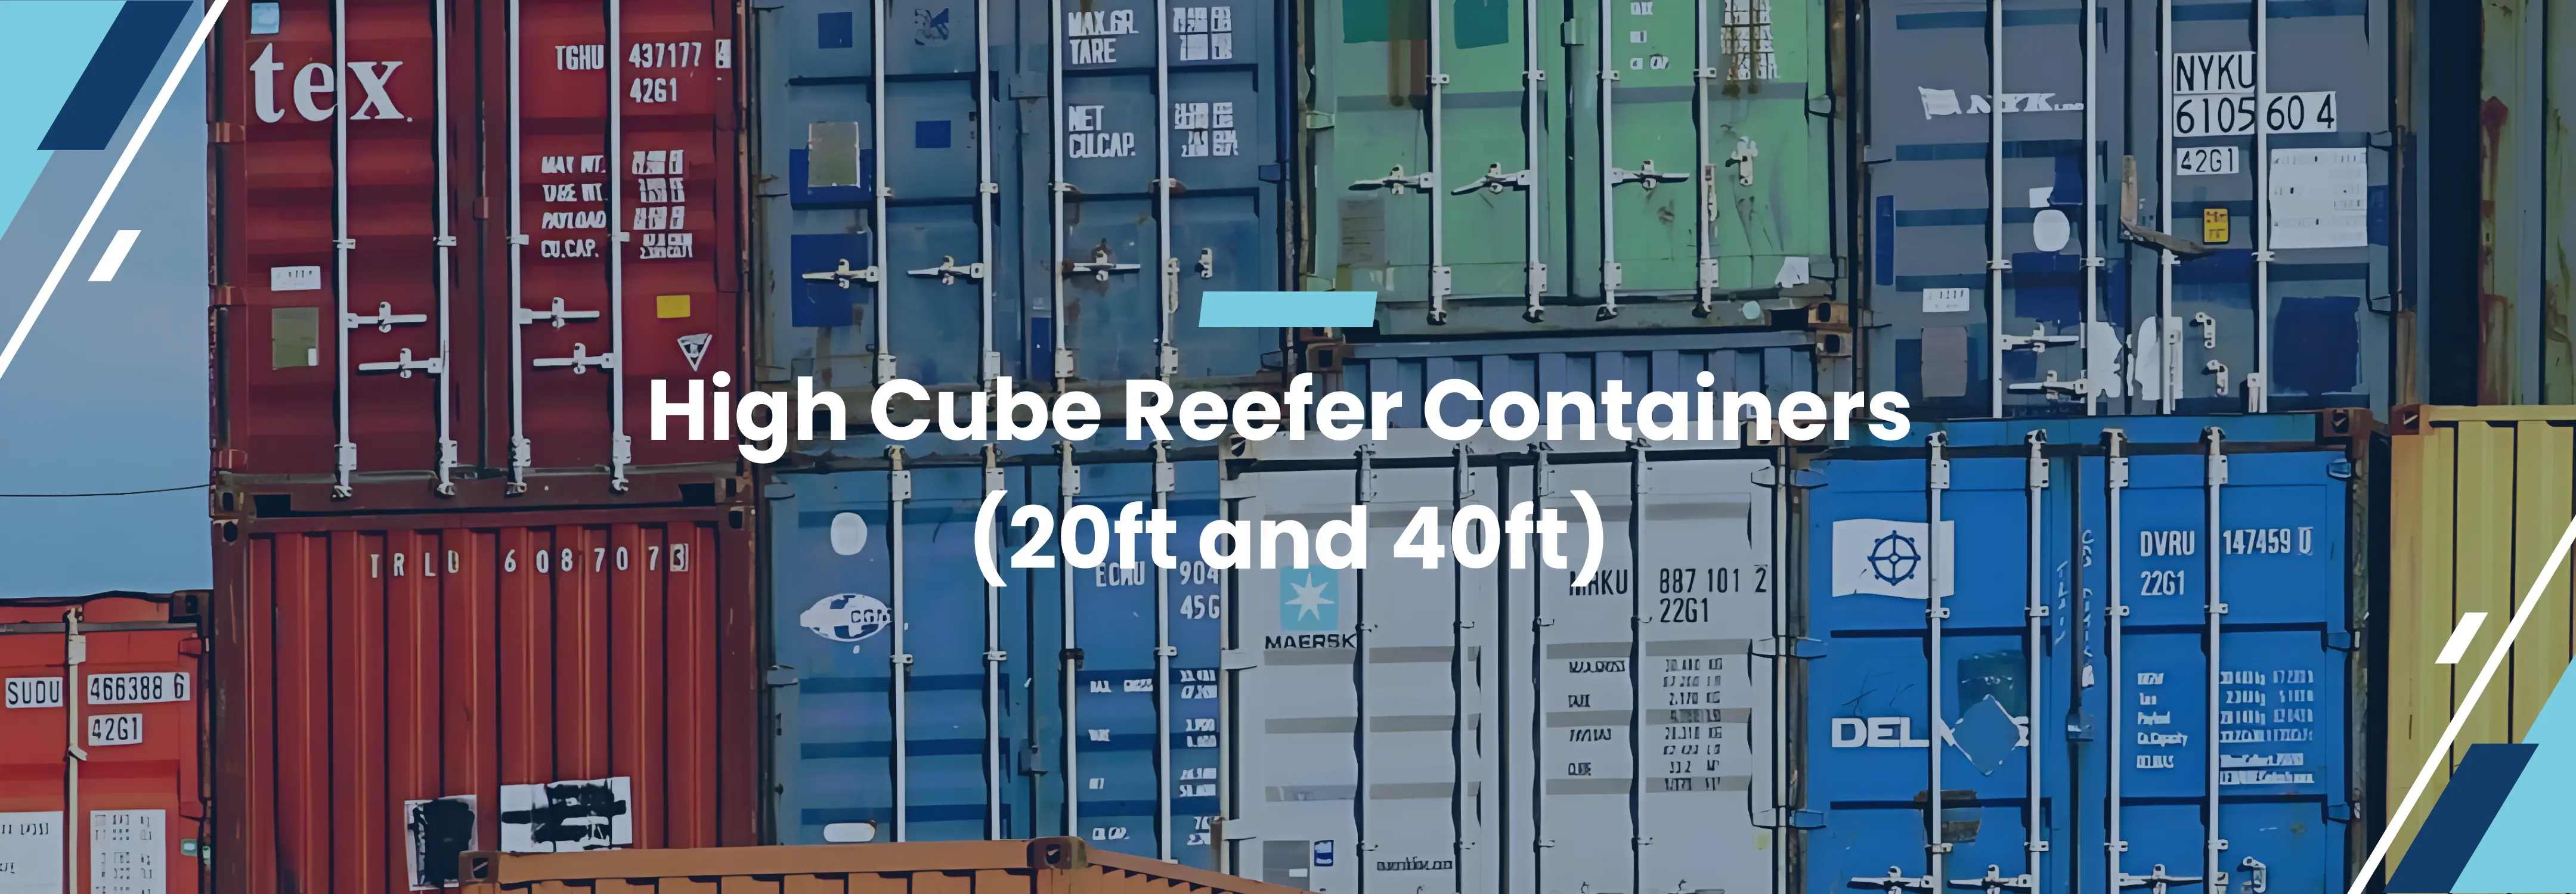 Banner of High Cube Reefer Containers